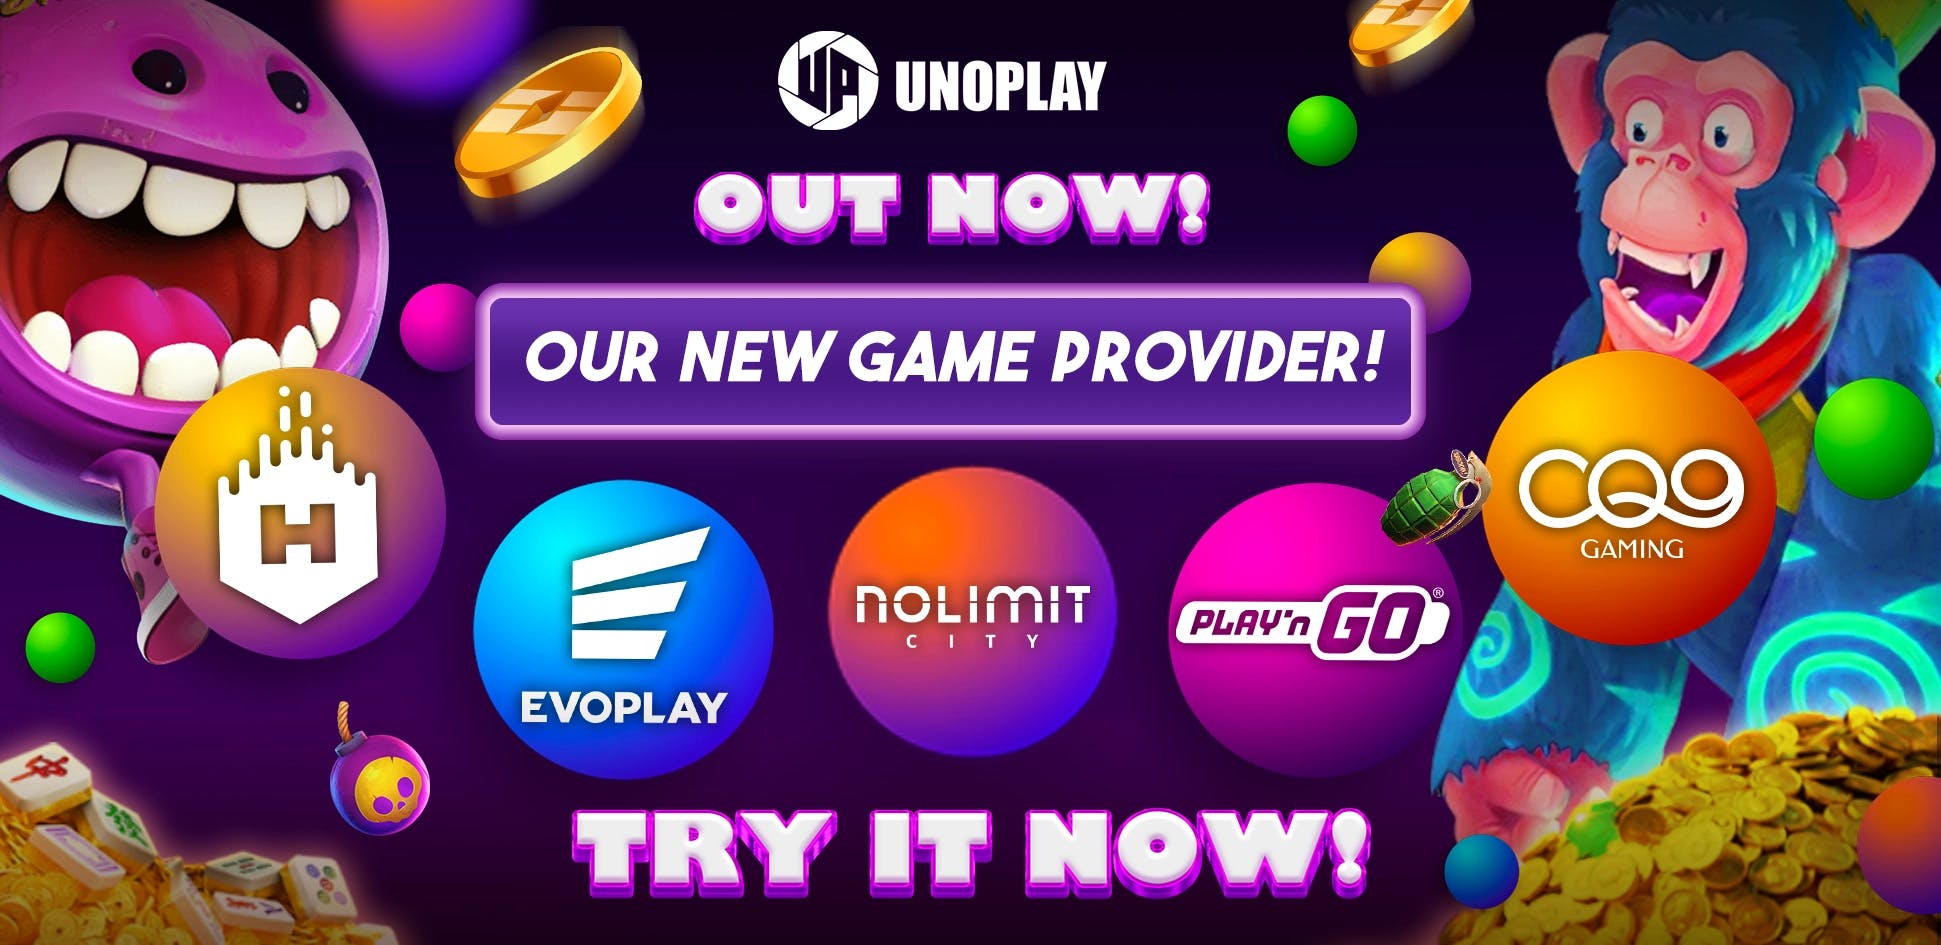 OUTNOW NEW PROVIDER (HABANERO, EVOPLAY, NOLIMIT, PNG, CQ9)